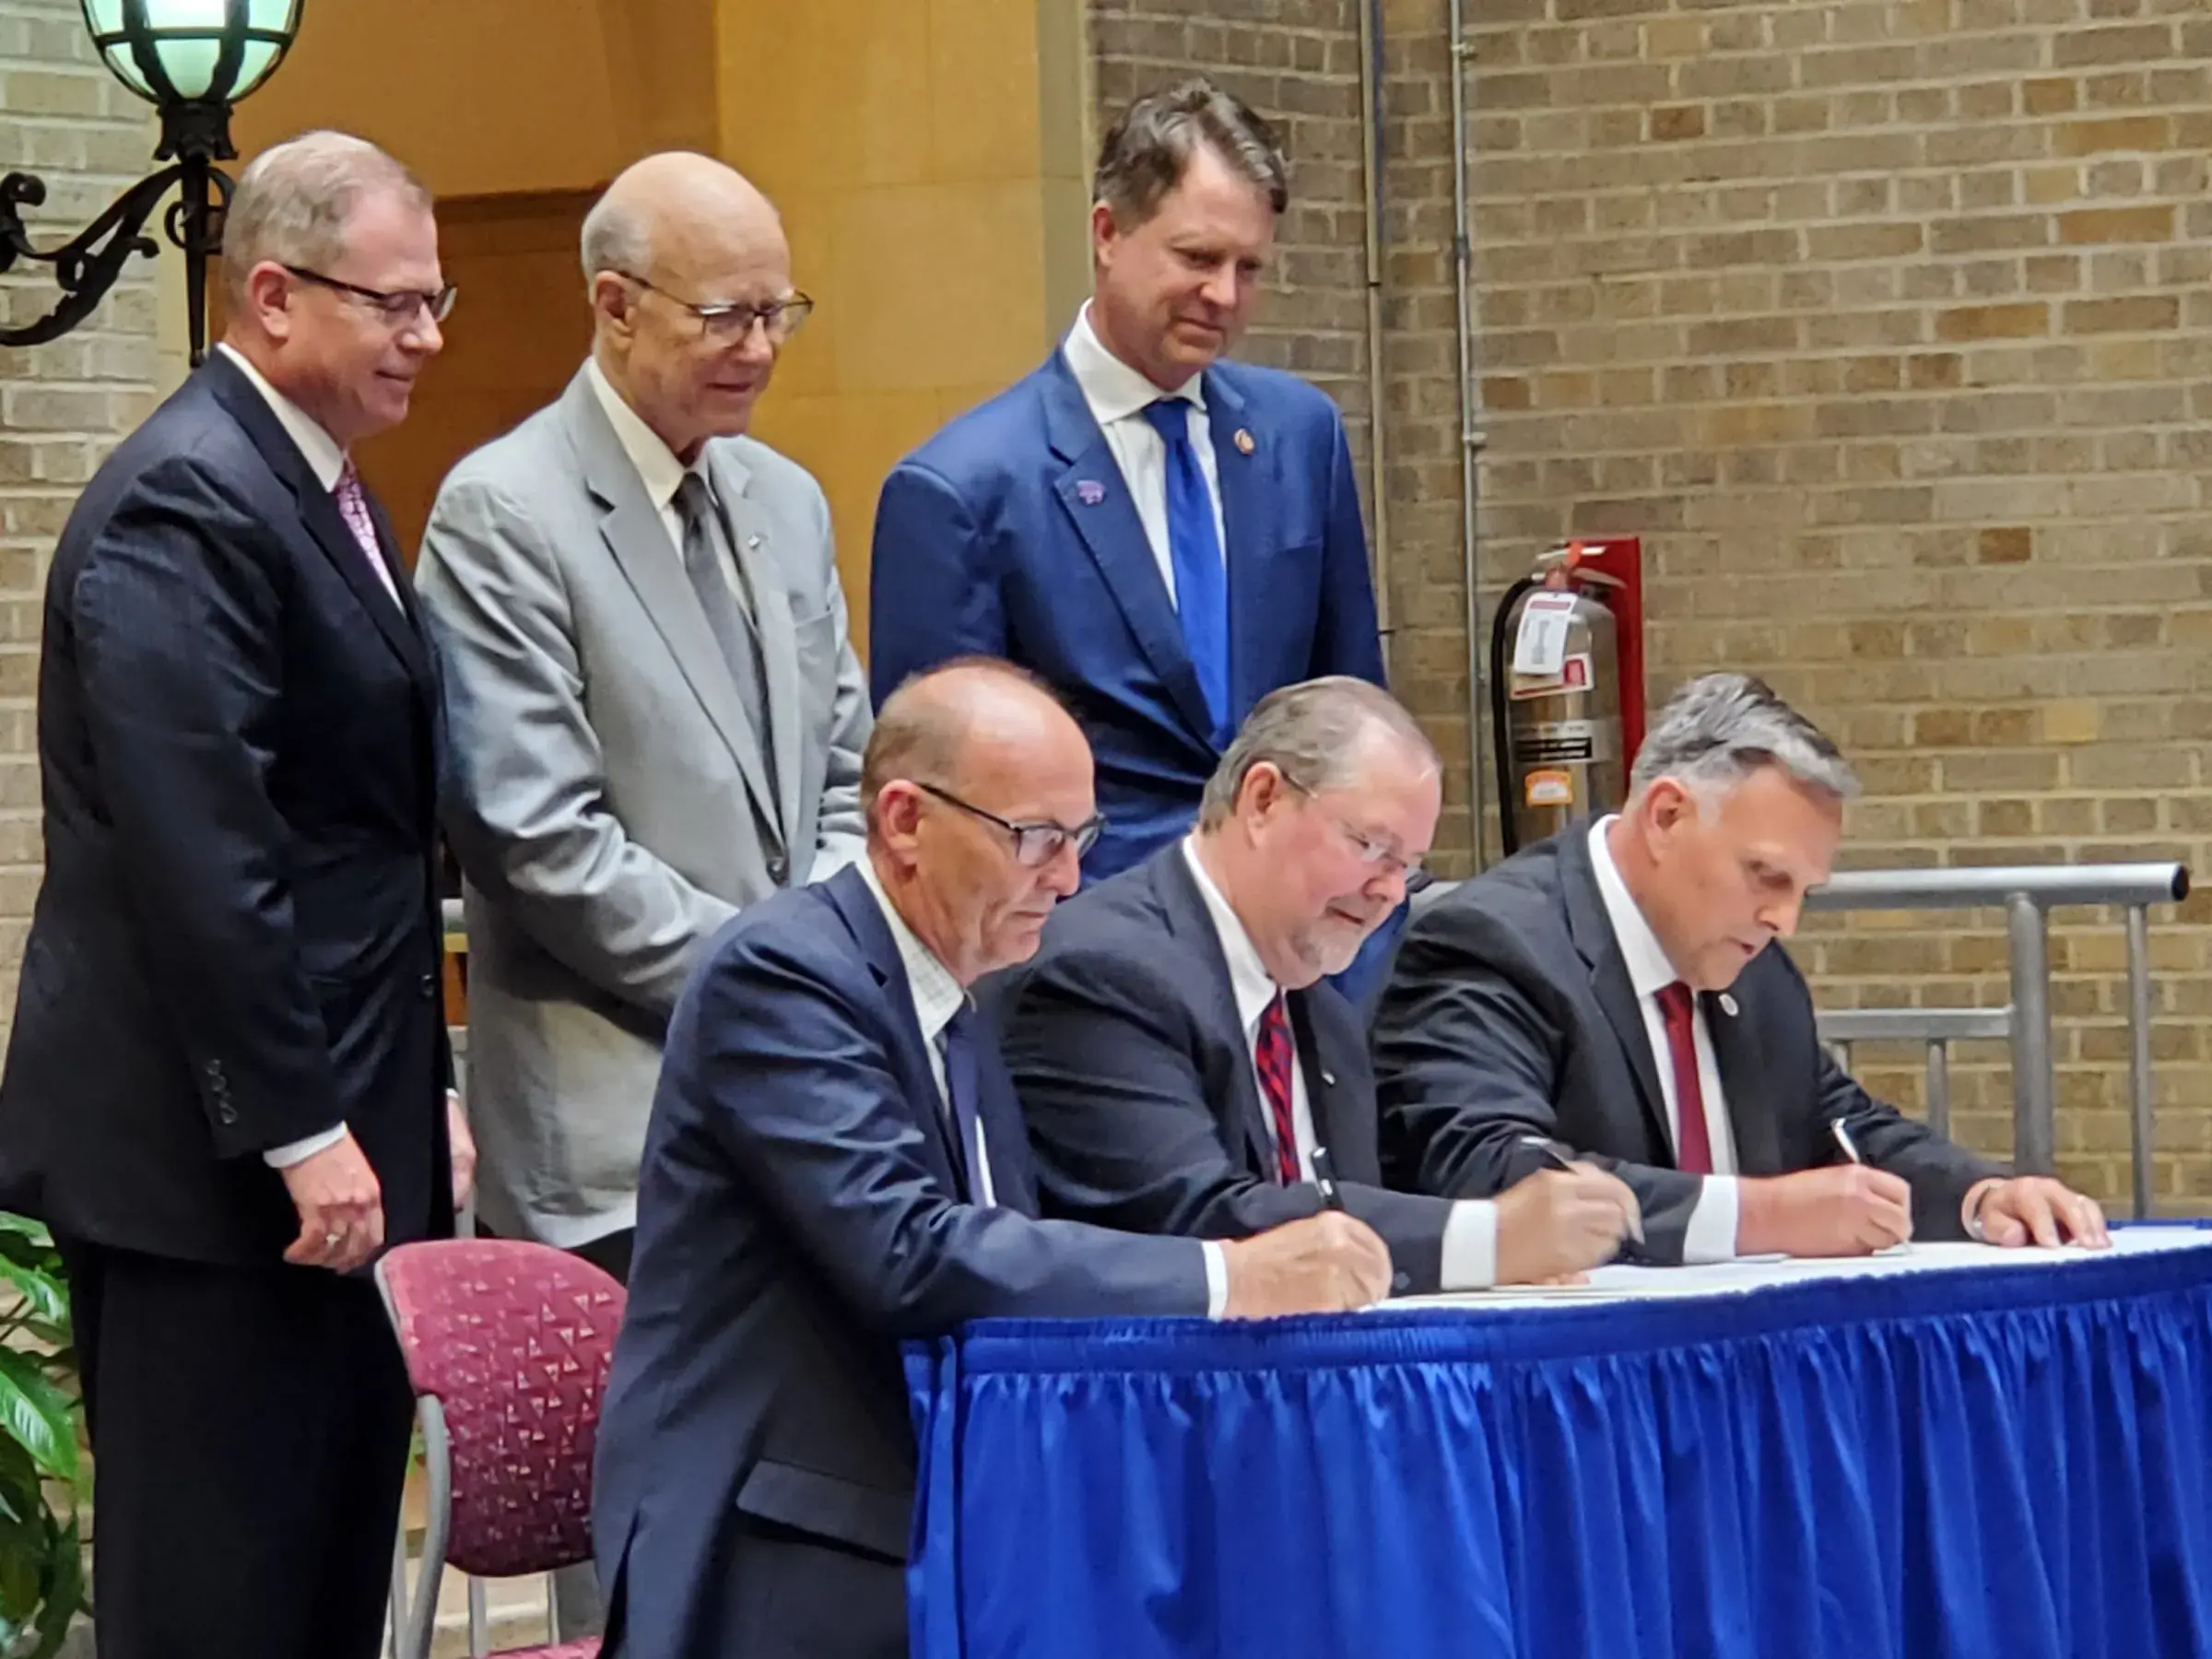 The agreement was signed by USDA Under Secretary for Marketing and Regulatory Programs Greg Ibach, USDA Deputy Under  Secretary for Research, Education, and Economics Scott Hutchins, and DHS Senior Official Performing the Duties of the Under Secretary for Science and Technology William Bryan